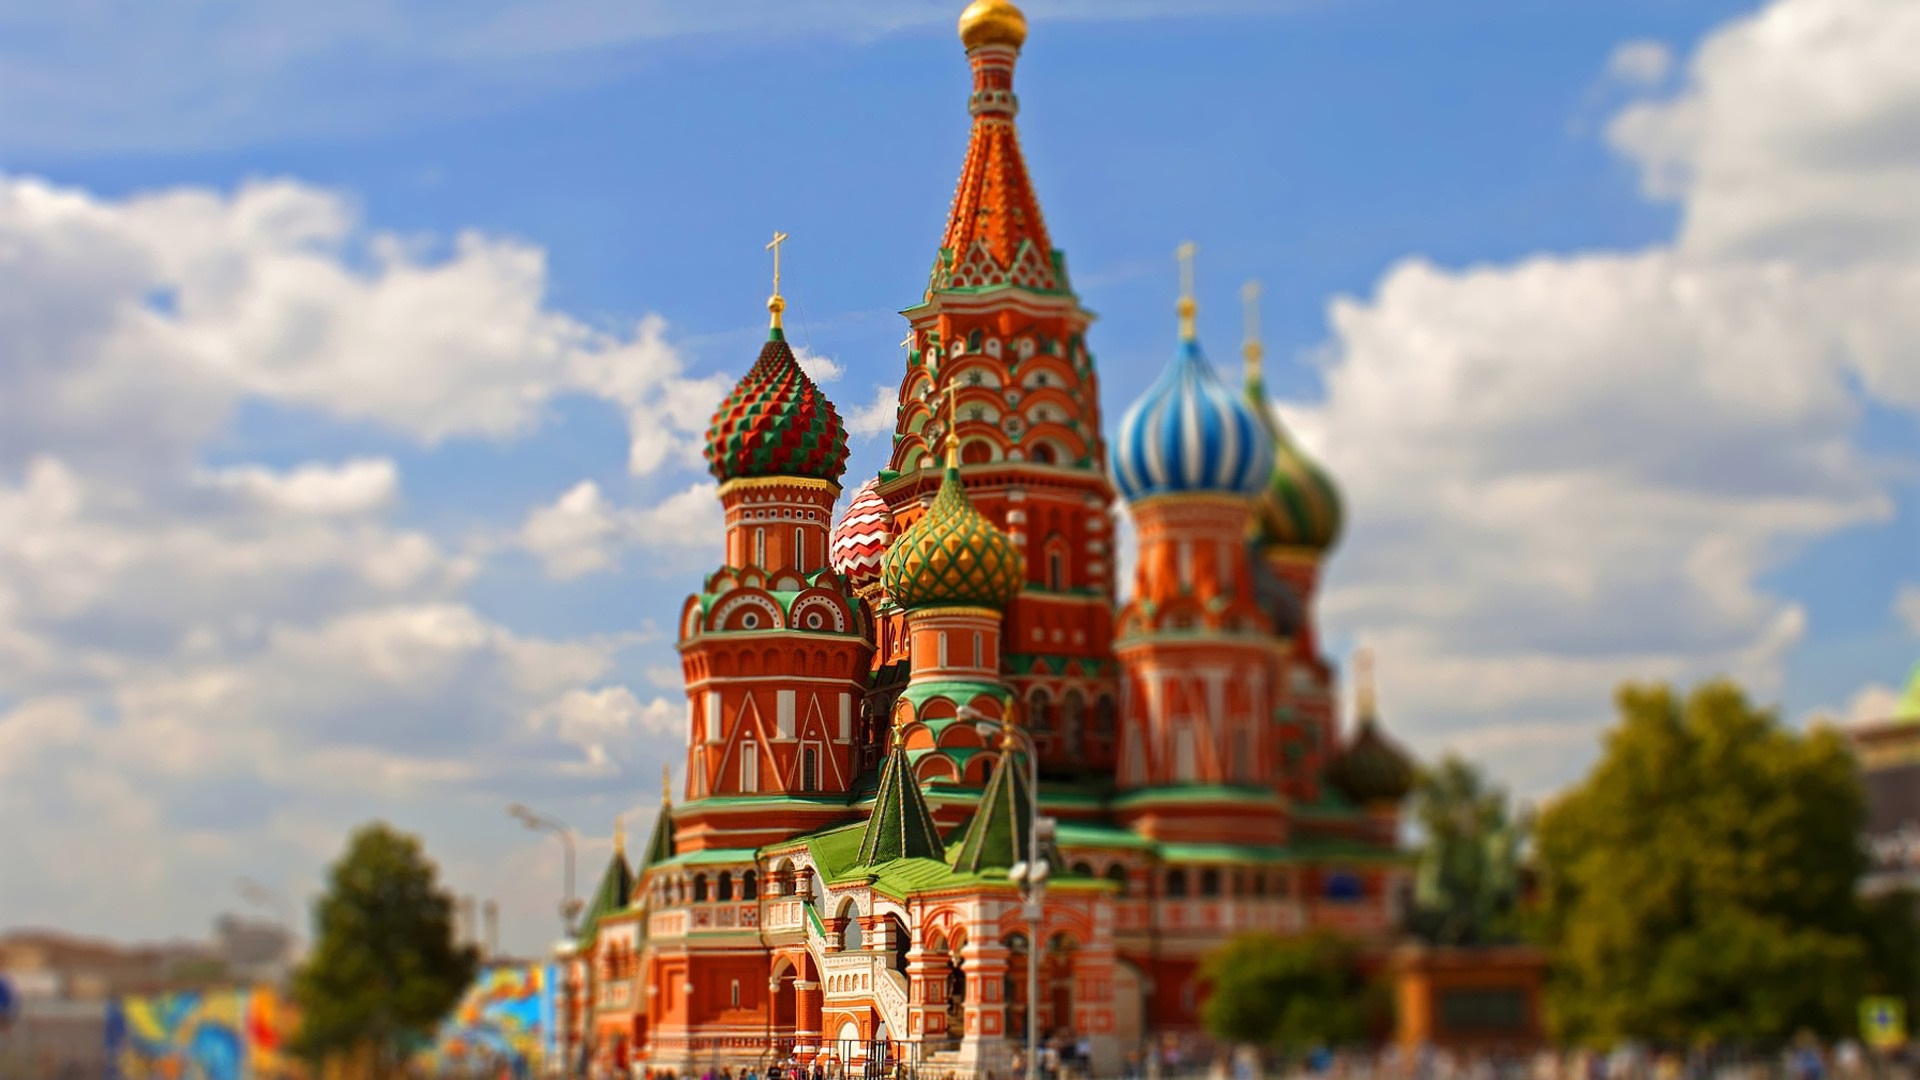 religious, saint basil's cathedral, architecture, building, cathedral, moscow, russia, tilt shift, cathedrals